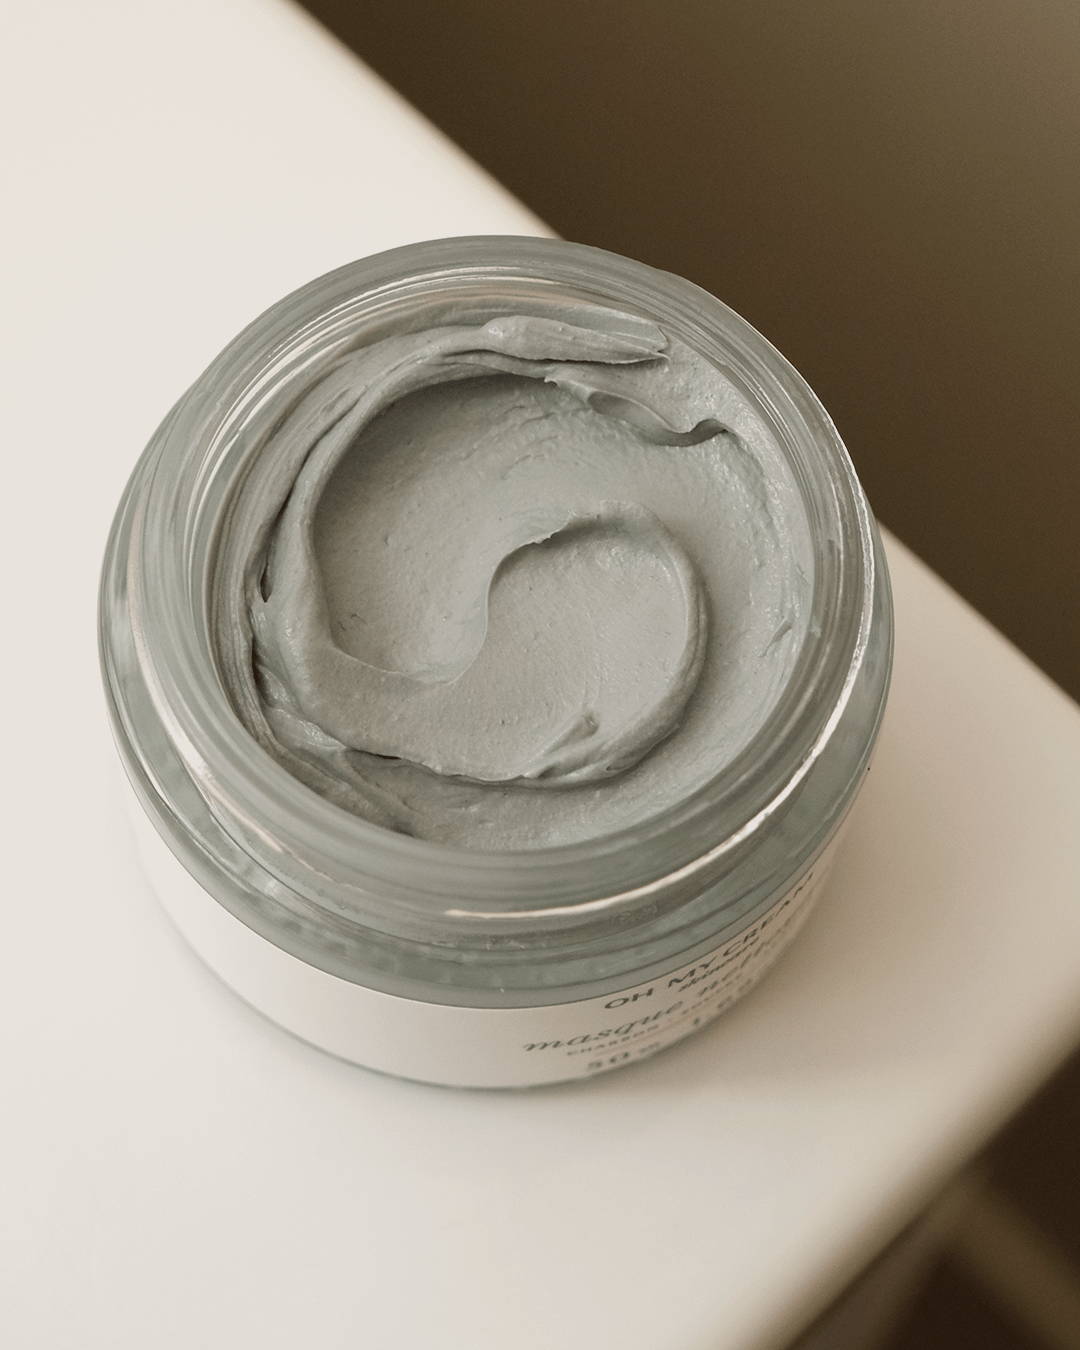 #seo: oh my cream cleansing mask